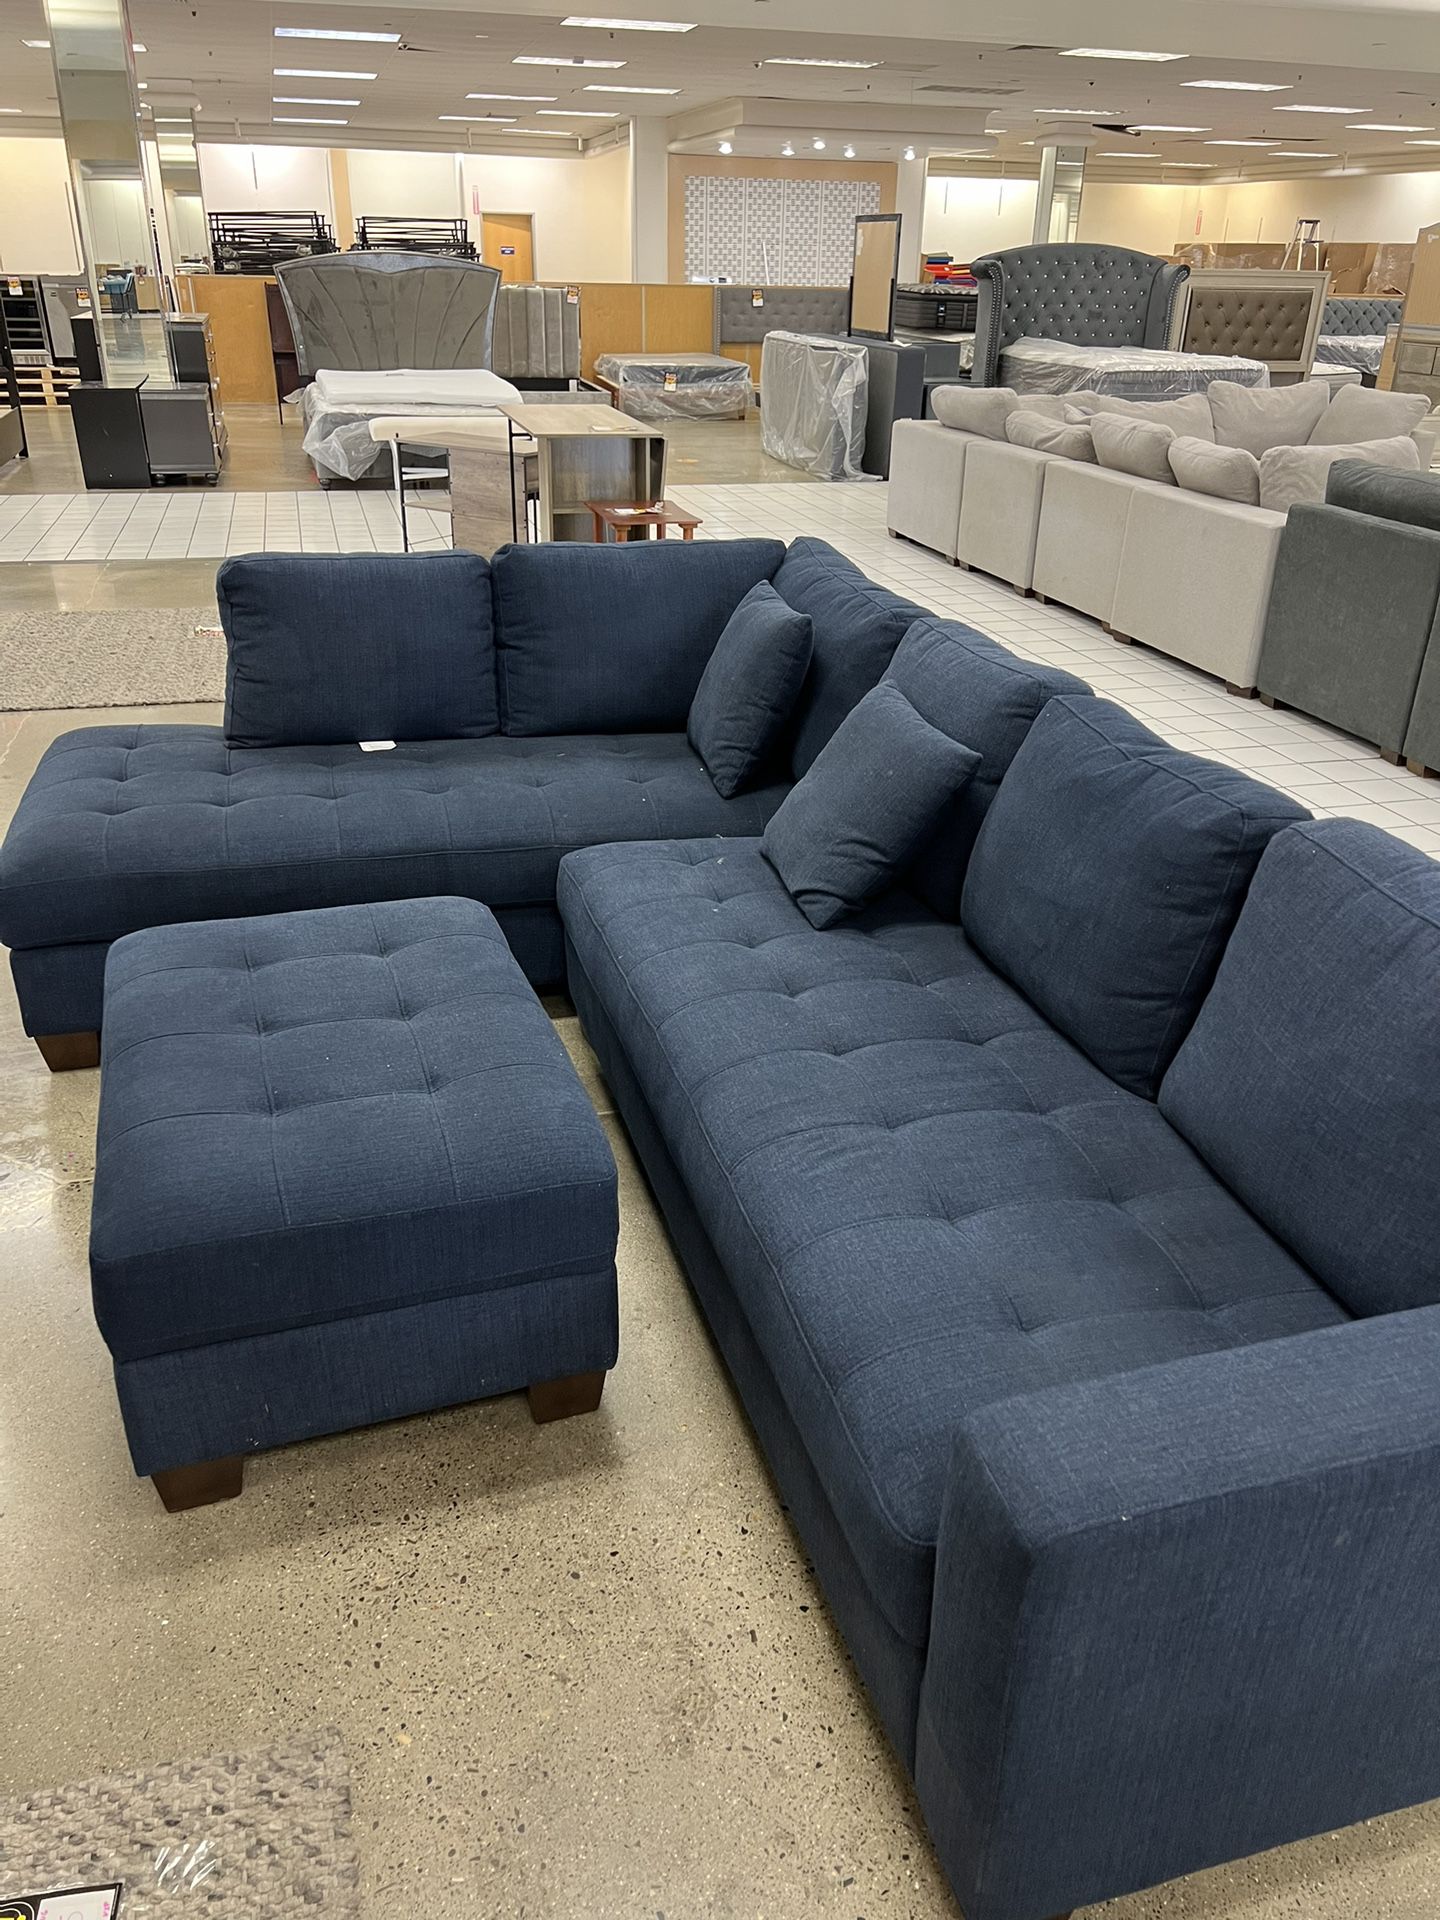 ONLY $999.00 Thomasville Fabric Sectional With Storage Ottoman.  